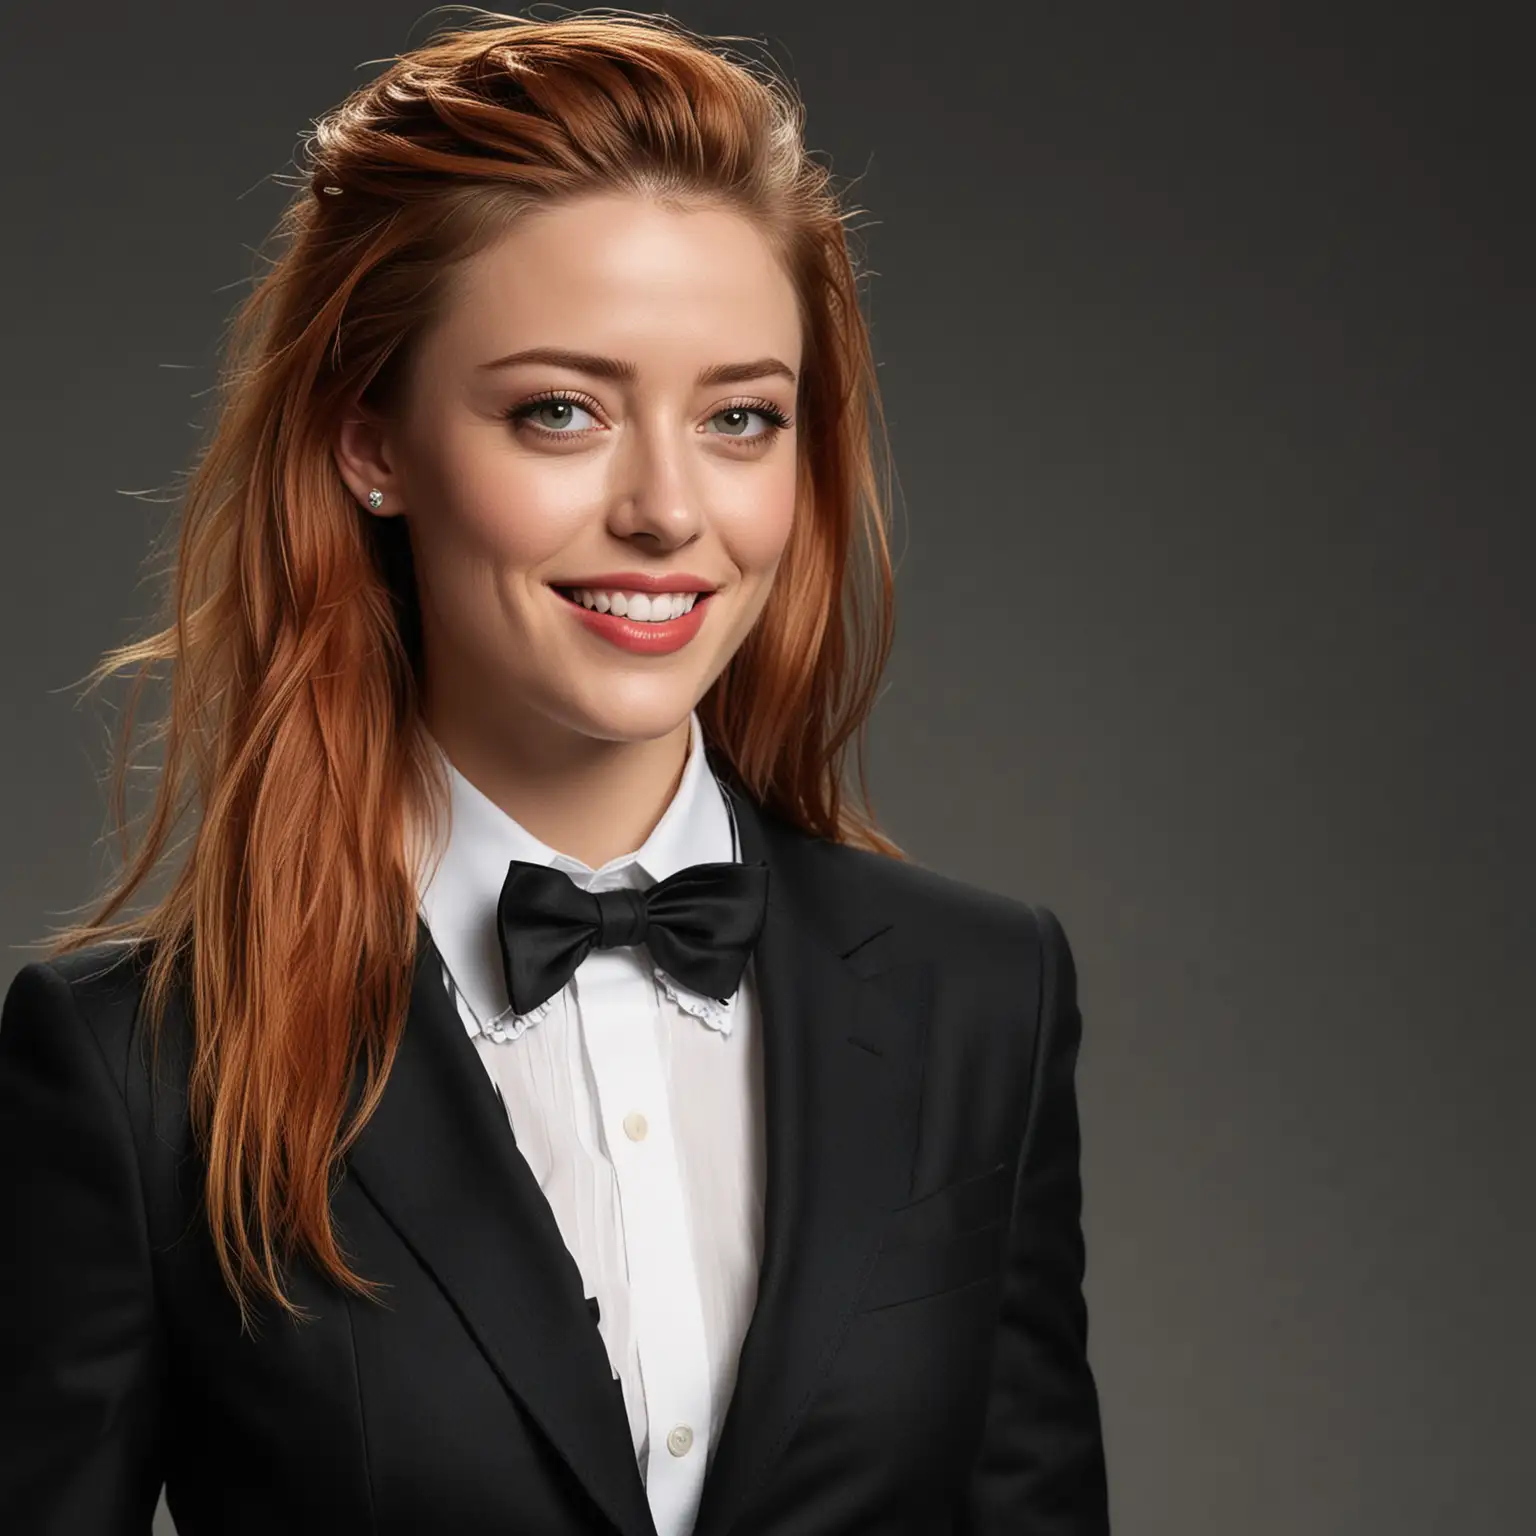 Amber Heard in Chic Black Linen Suit with Refreshing Smile